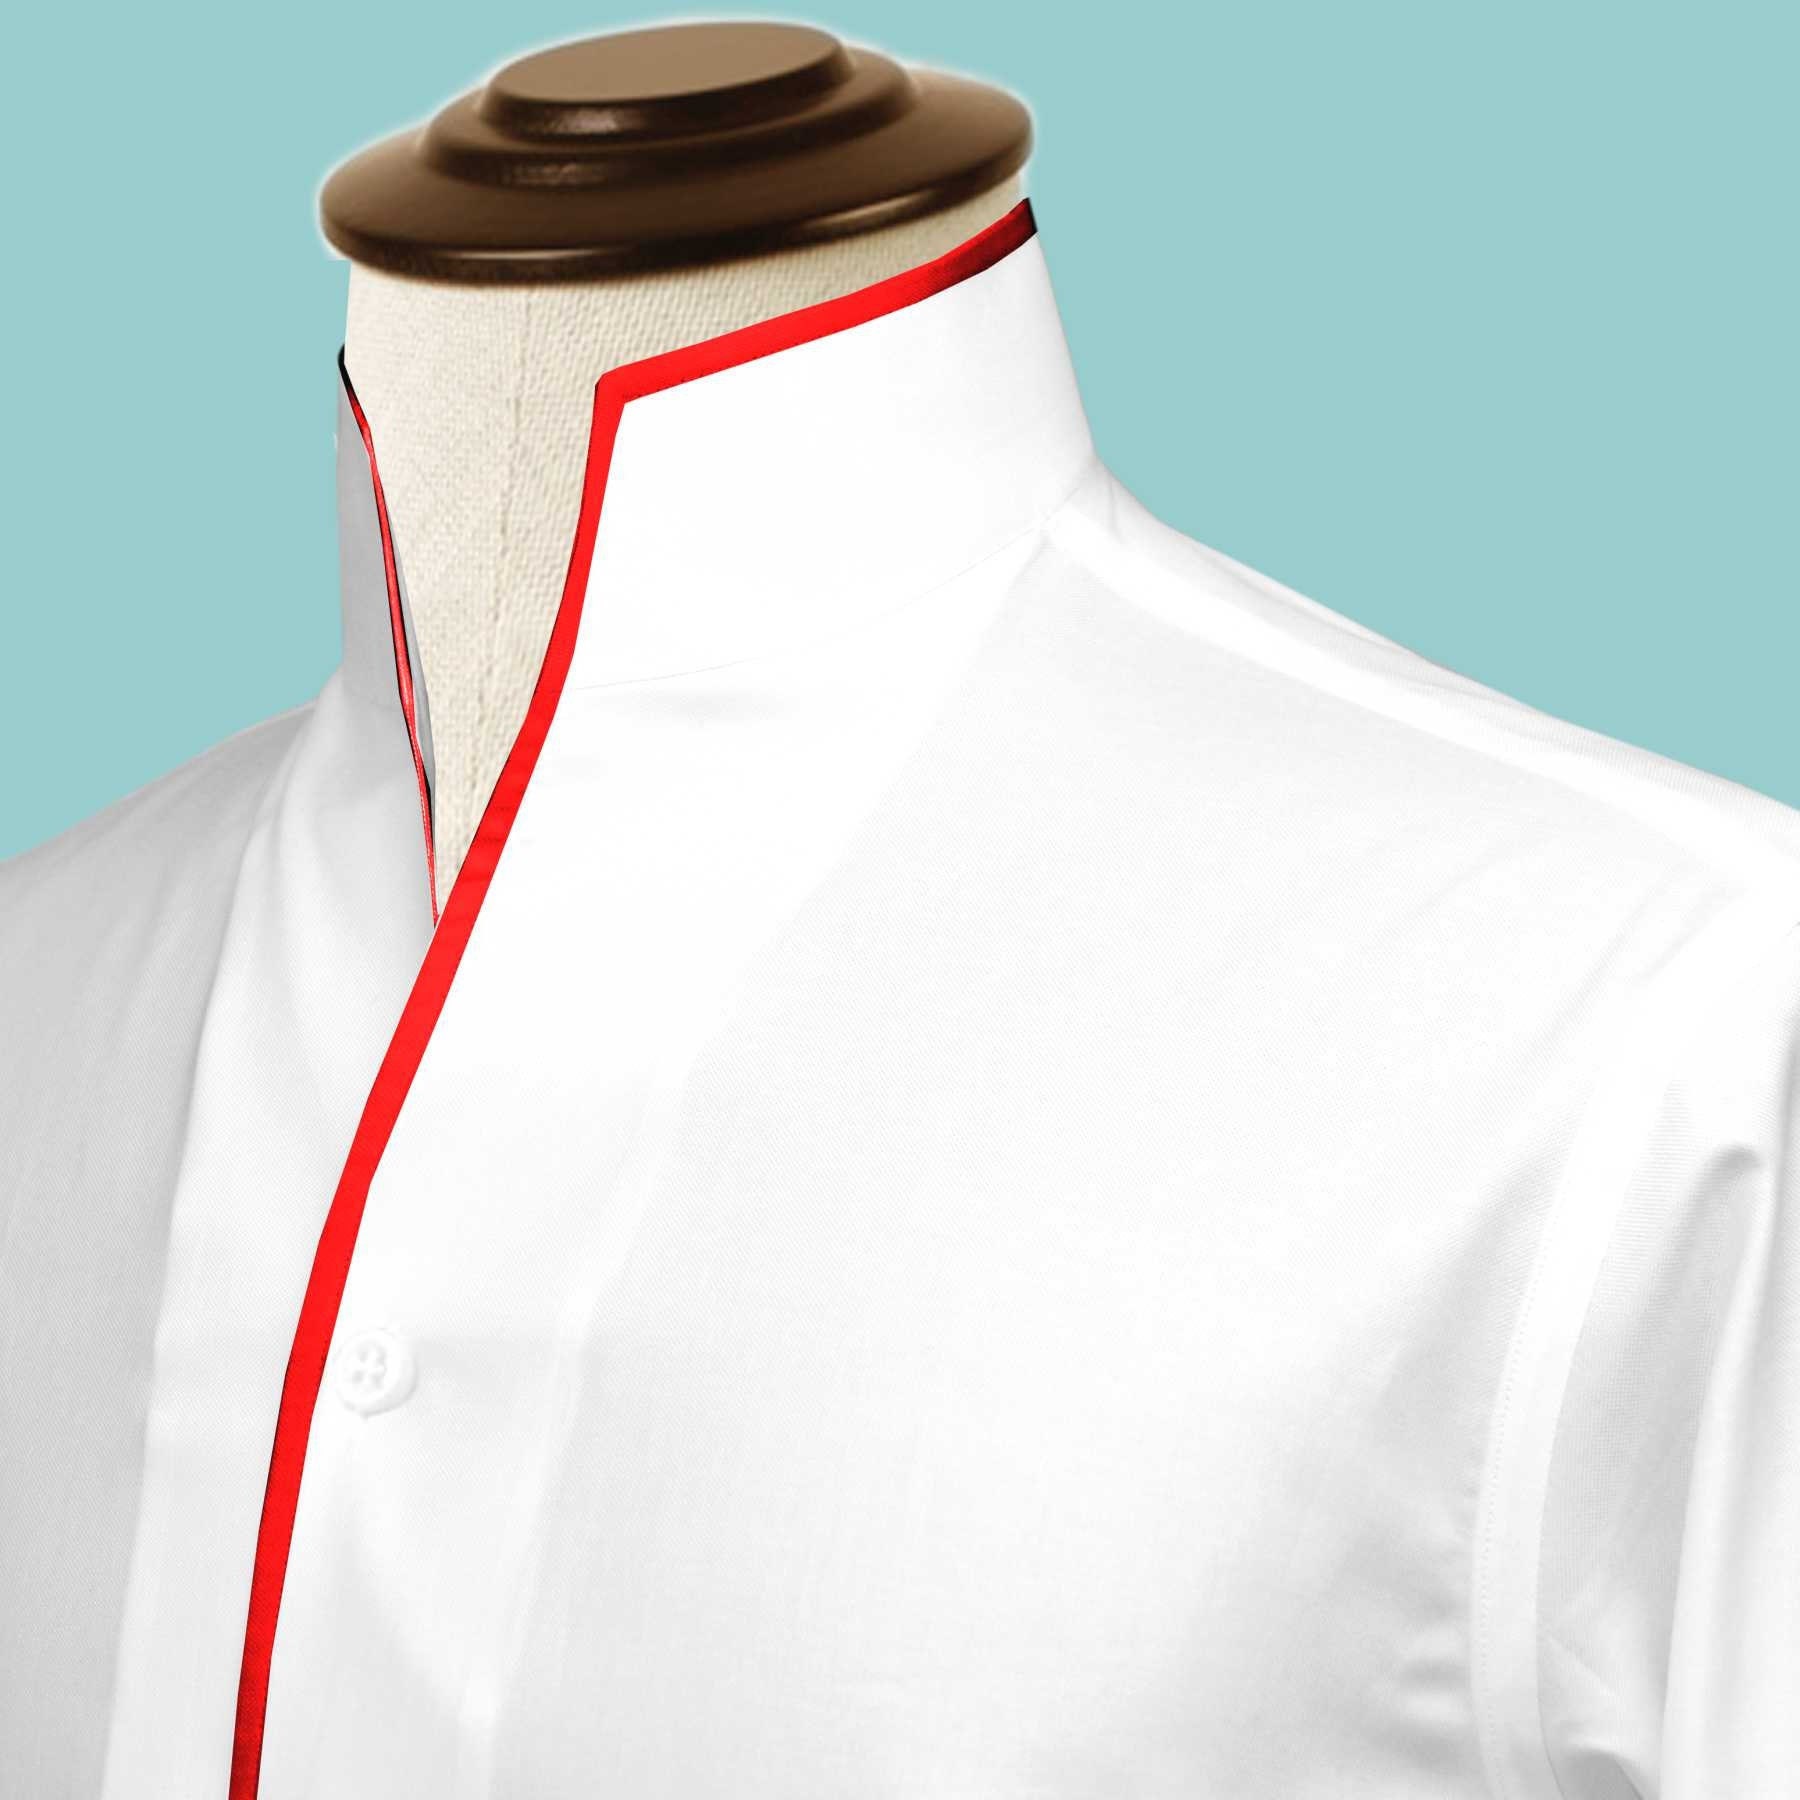 Mens Yoga Shirts Chinese Collared in White